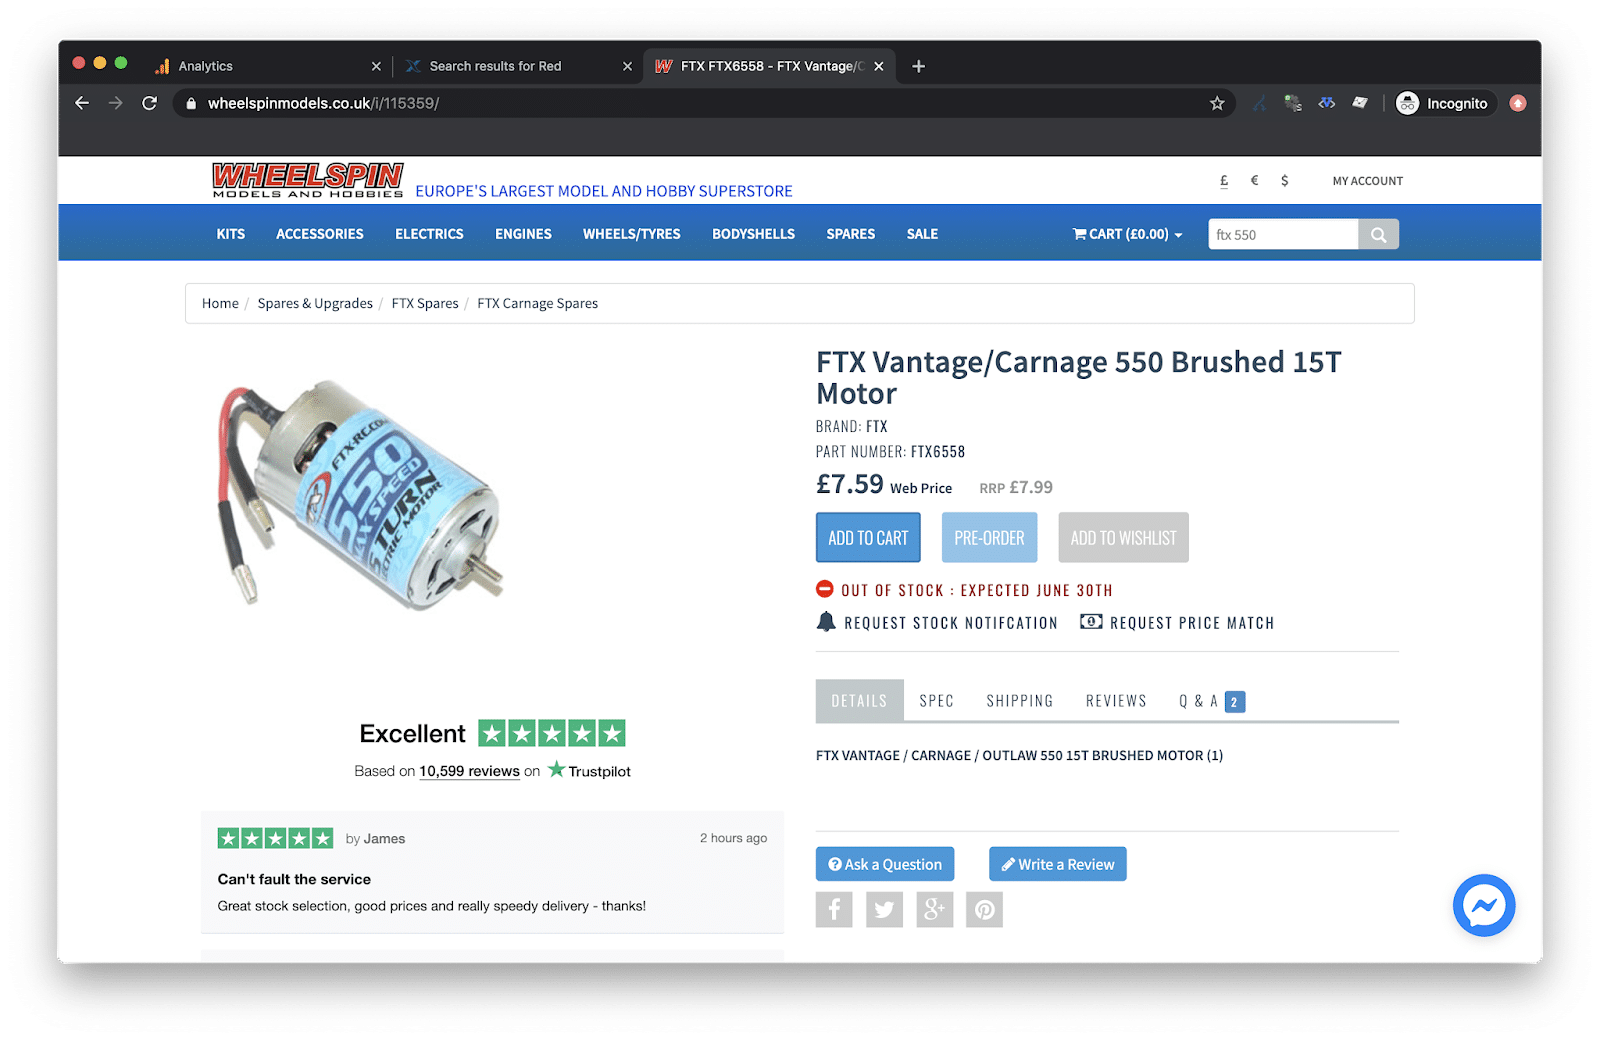 FTX Vantage Motor is out of stock